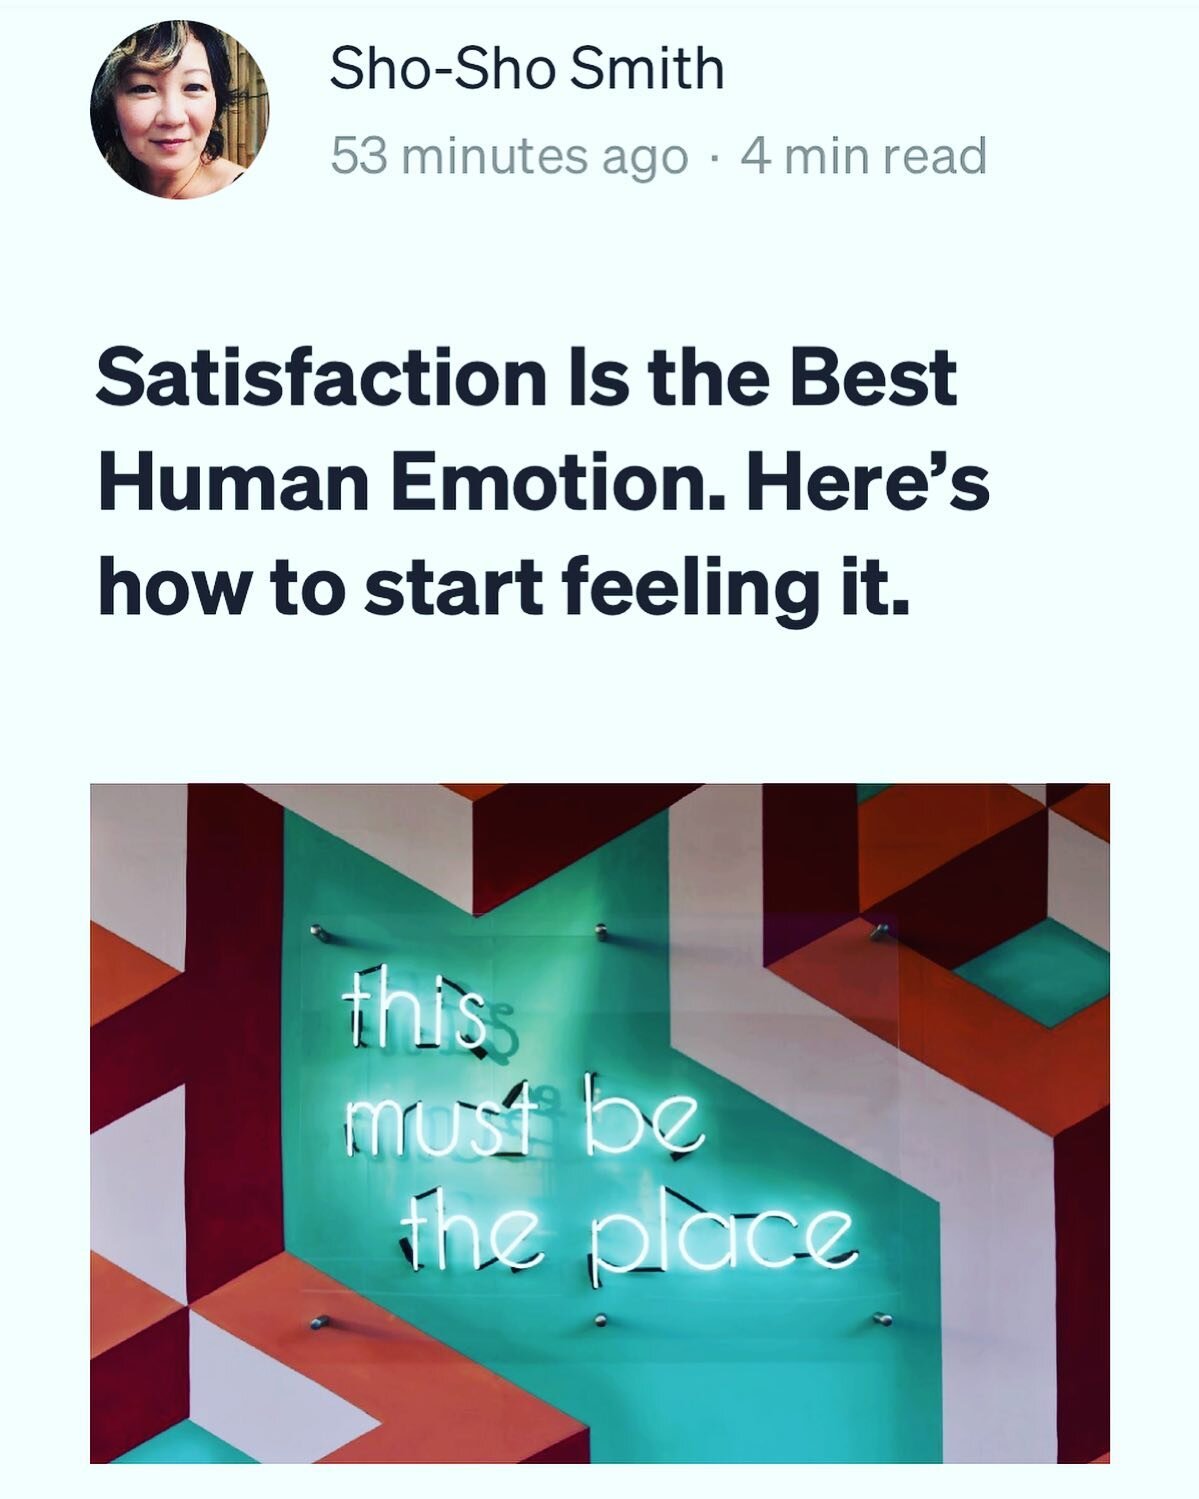 My latest article on https://medium.com/@shoshosmith

Excerpt: &ldquo;Satisfaction is not a concept but a physical experience in your body. There&rsquo;s always a visceral gut component. The body registers even the smallest satisfaction as a peak exp